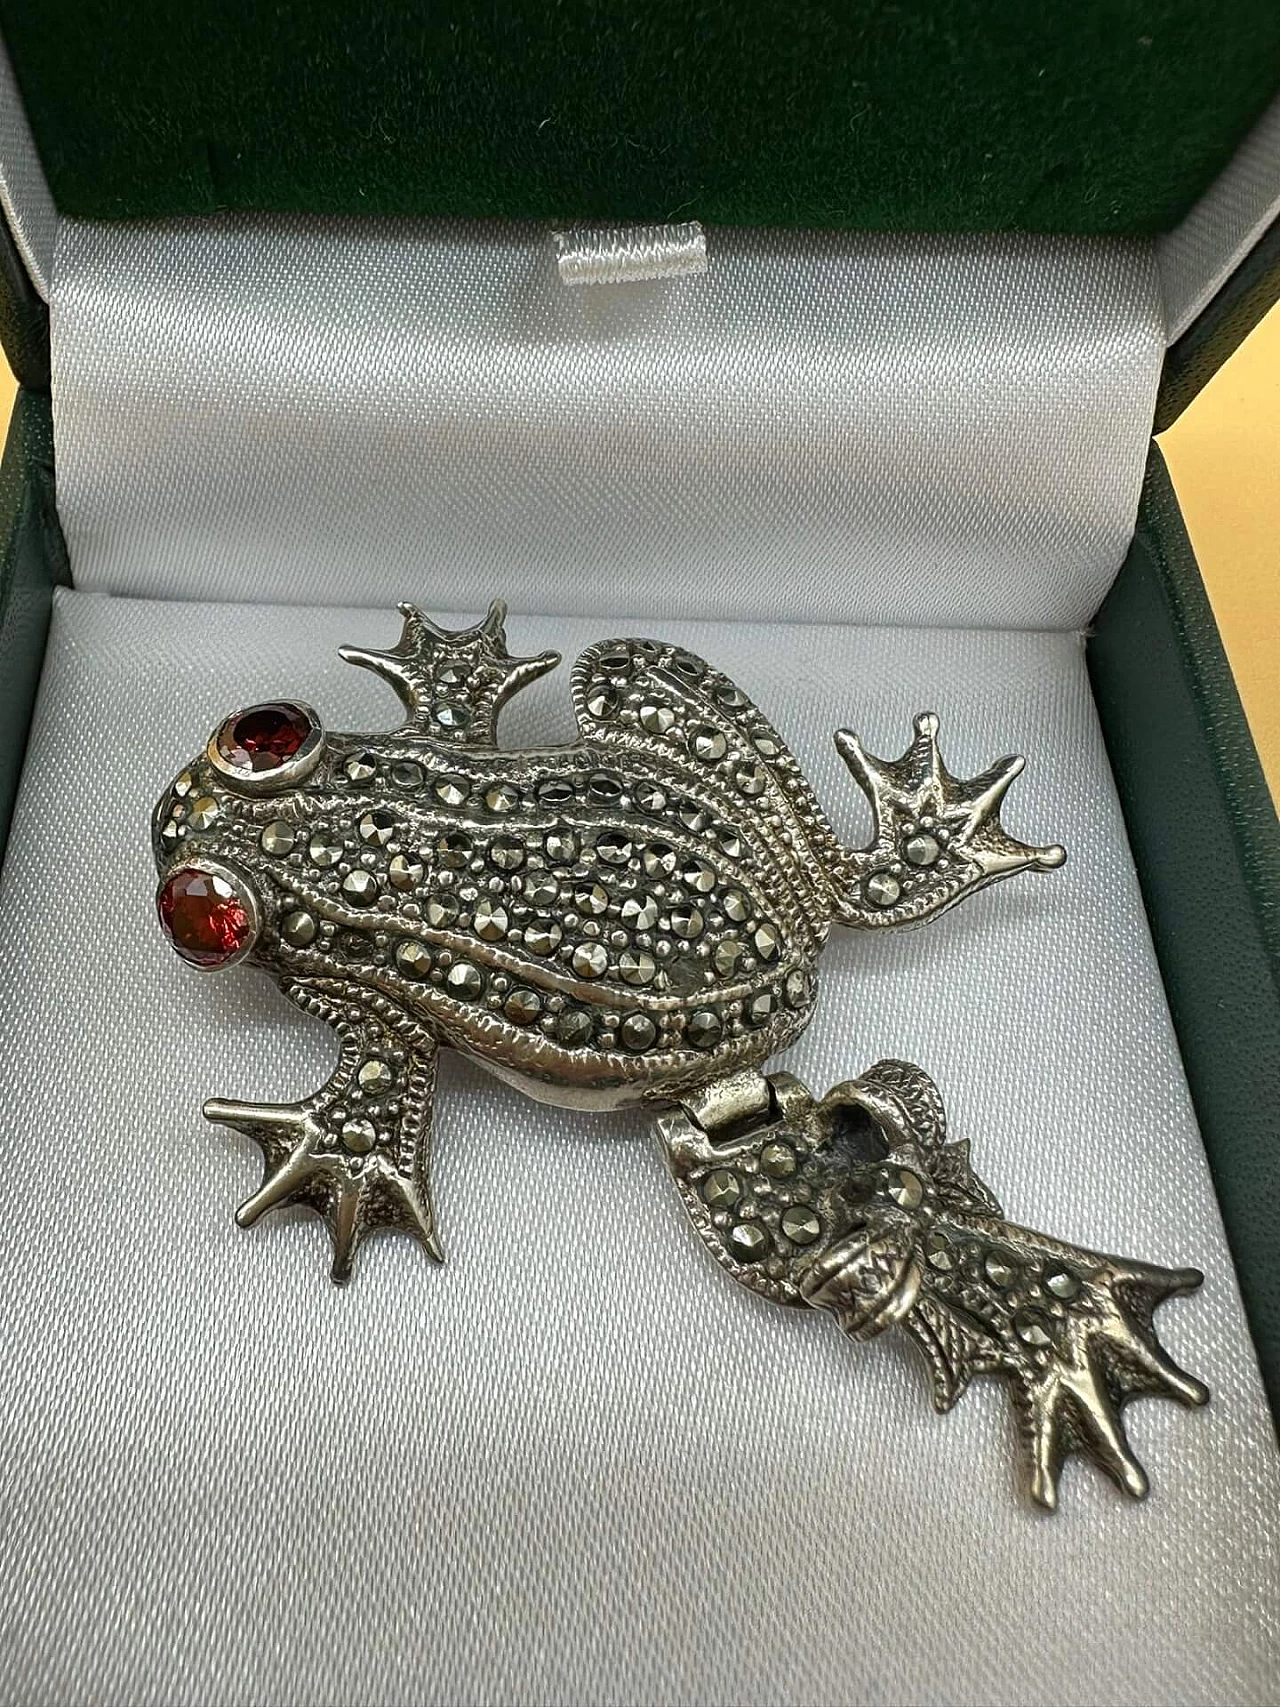 Silver frog brooch with rhinestones and rubies, early 20th century 1